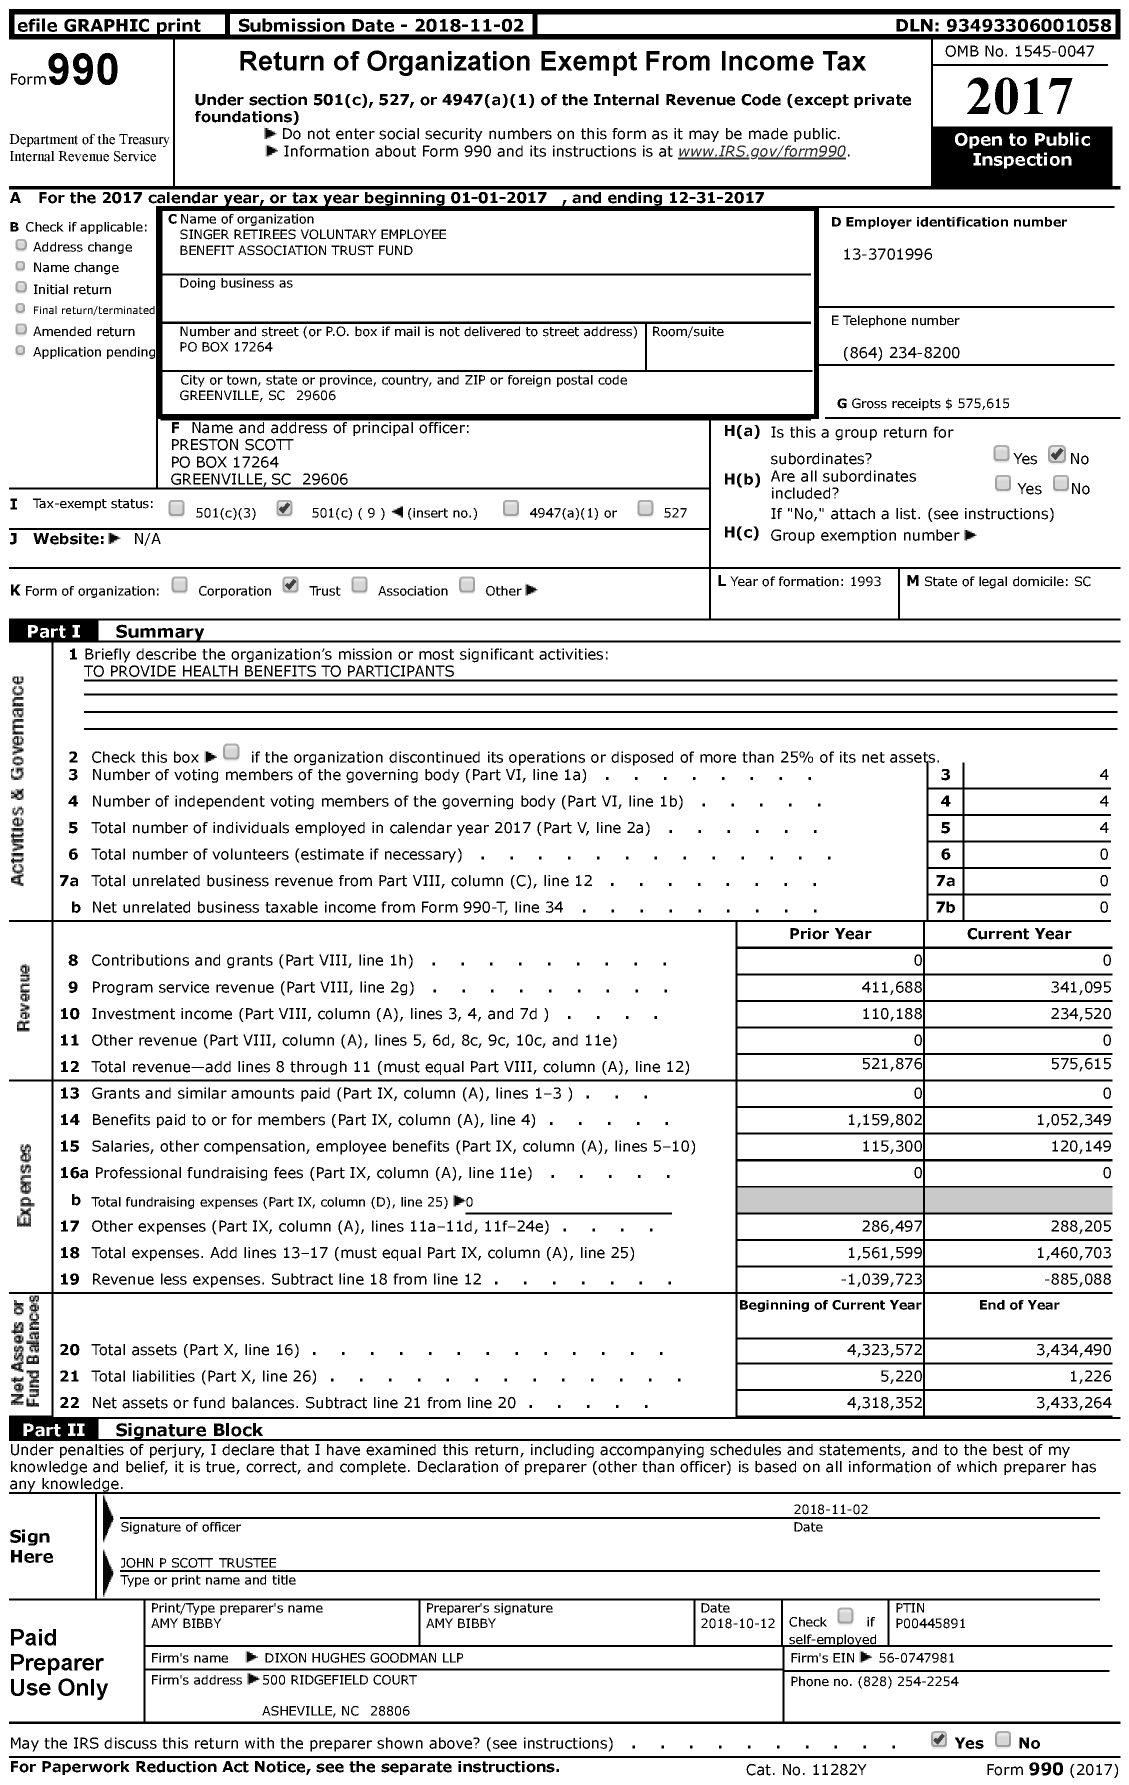 Image of first page of 2017 Form 990 for Singer Retirees Voluntary Employee Benefit Association Trust Fund